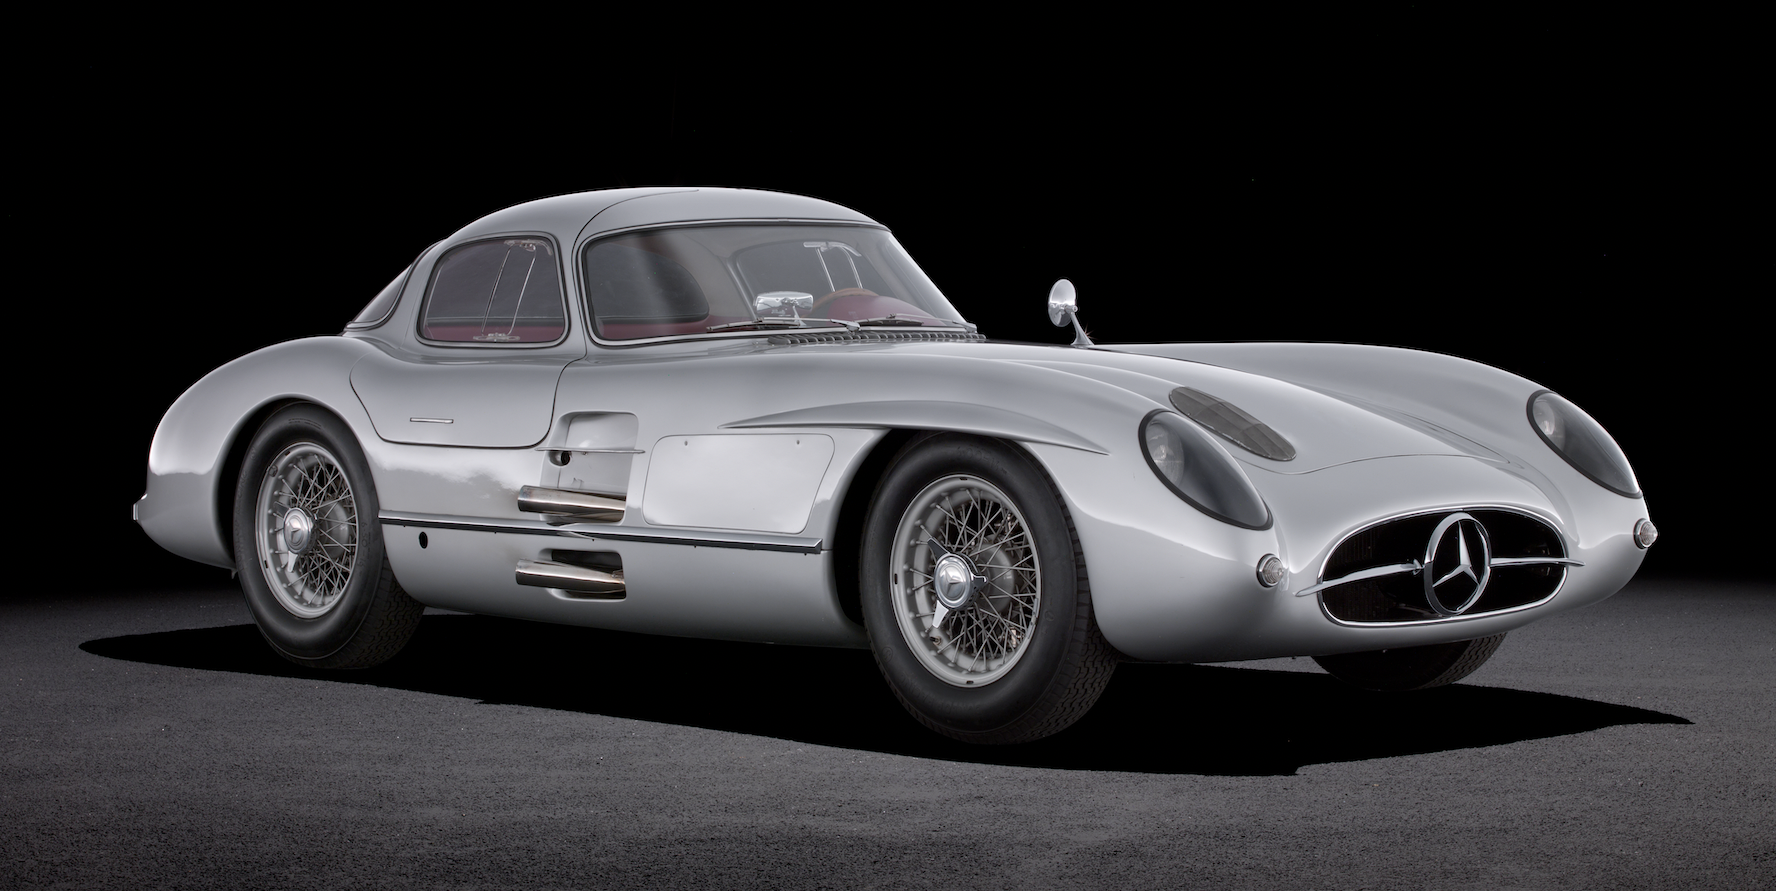 Mercedes 300 SLR Prototype Sells for $142 Million, Shattering Most Expensive Car Record